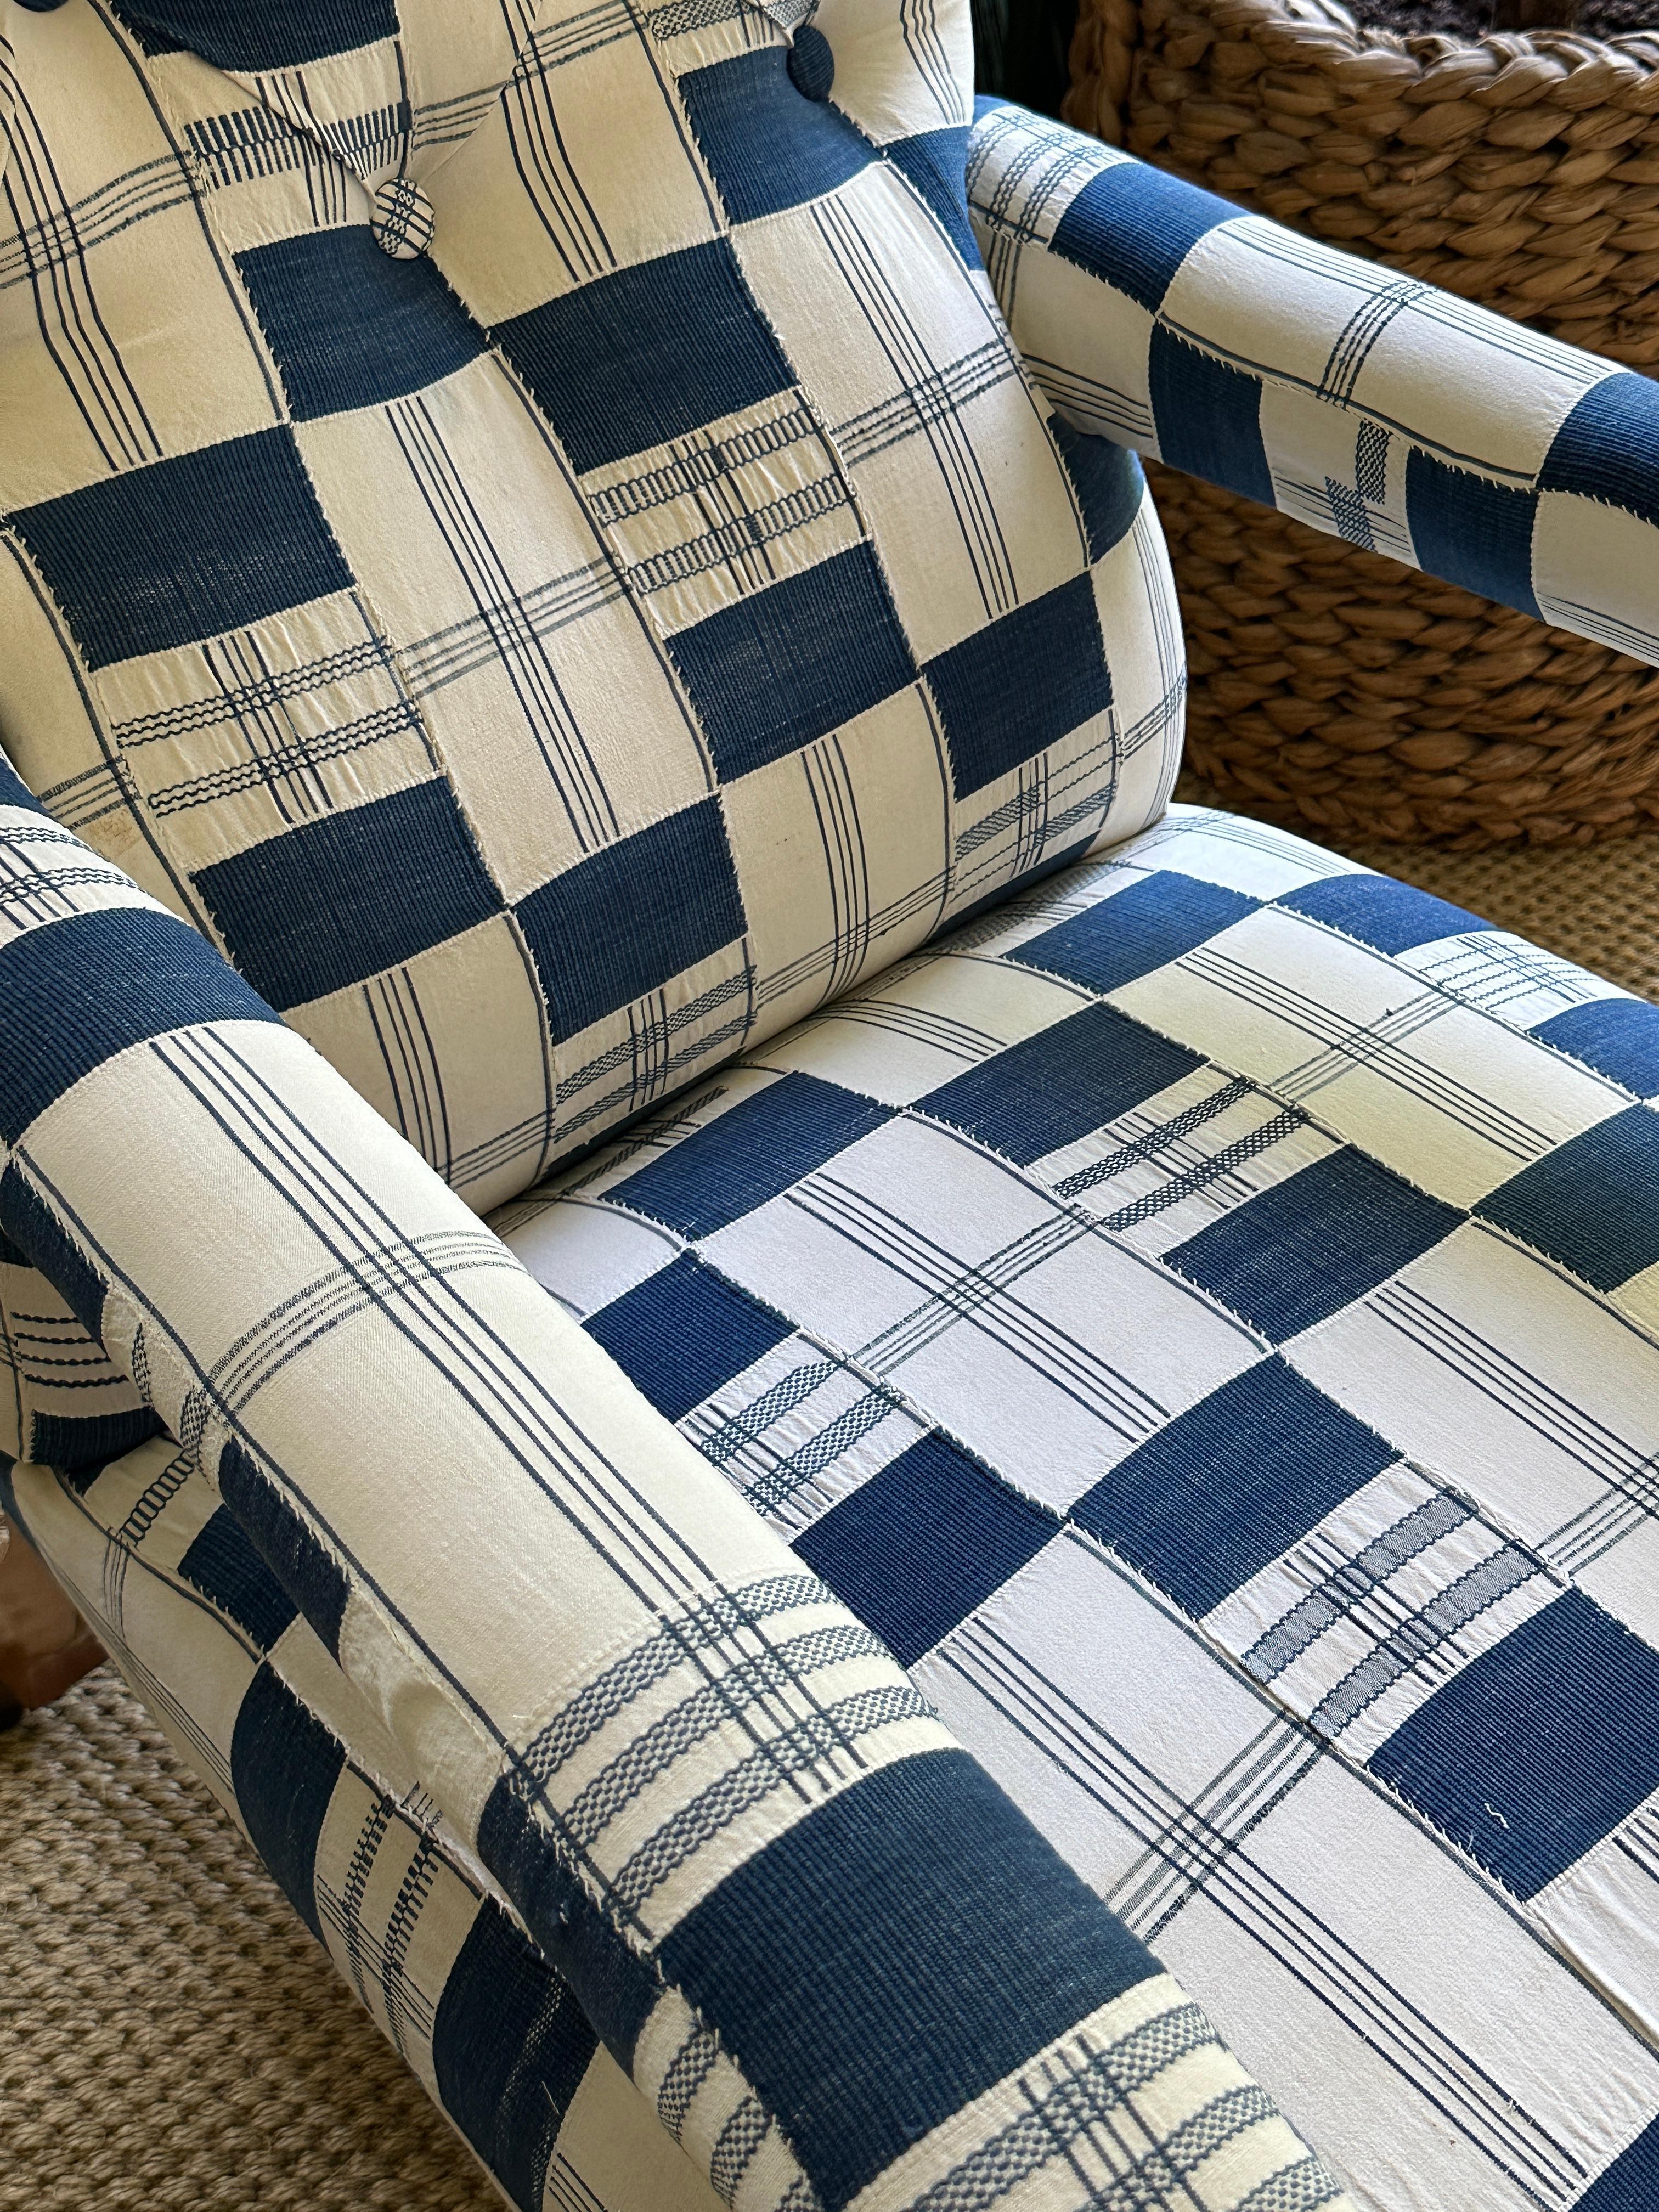 Mid-19th Century open armchair by Hindley & Son made in birch and upholstered in a vintage blue and white Kente Cloth from Ghana. Mid-19th Century.

Fully restored and re-upholstered.